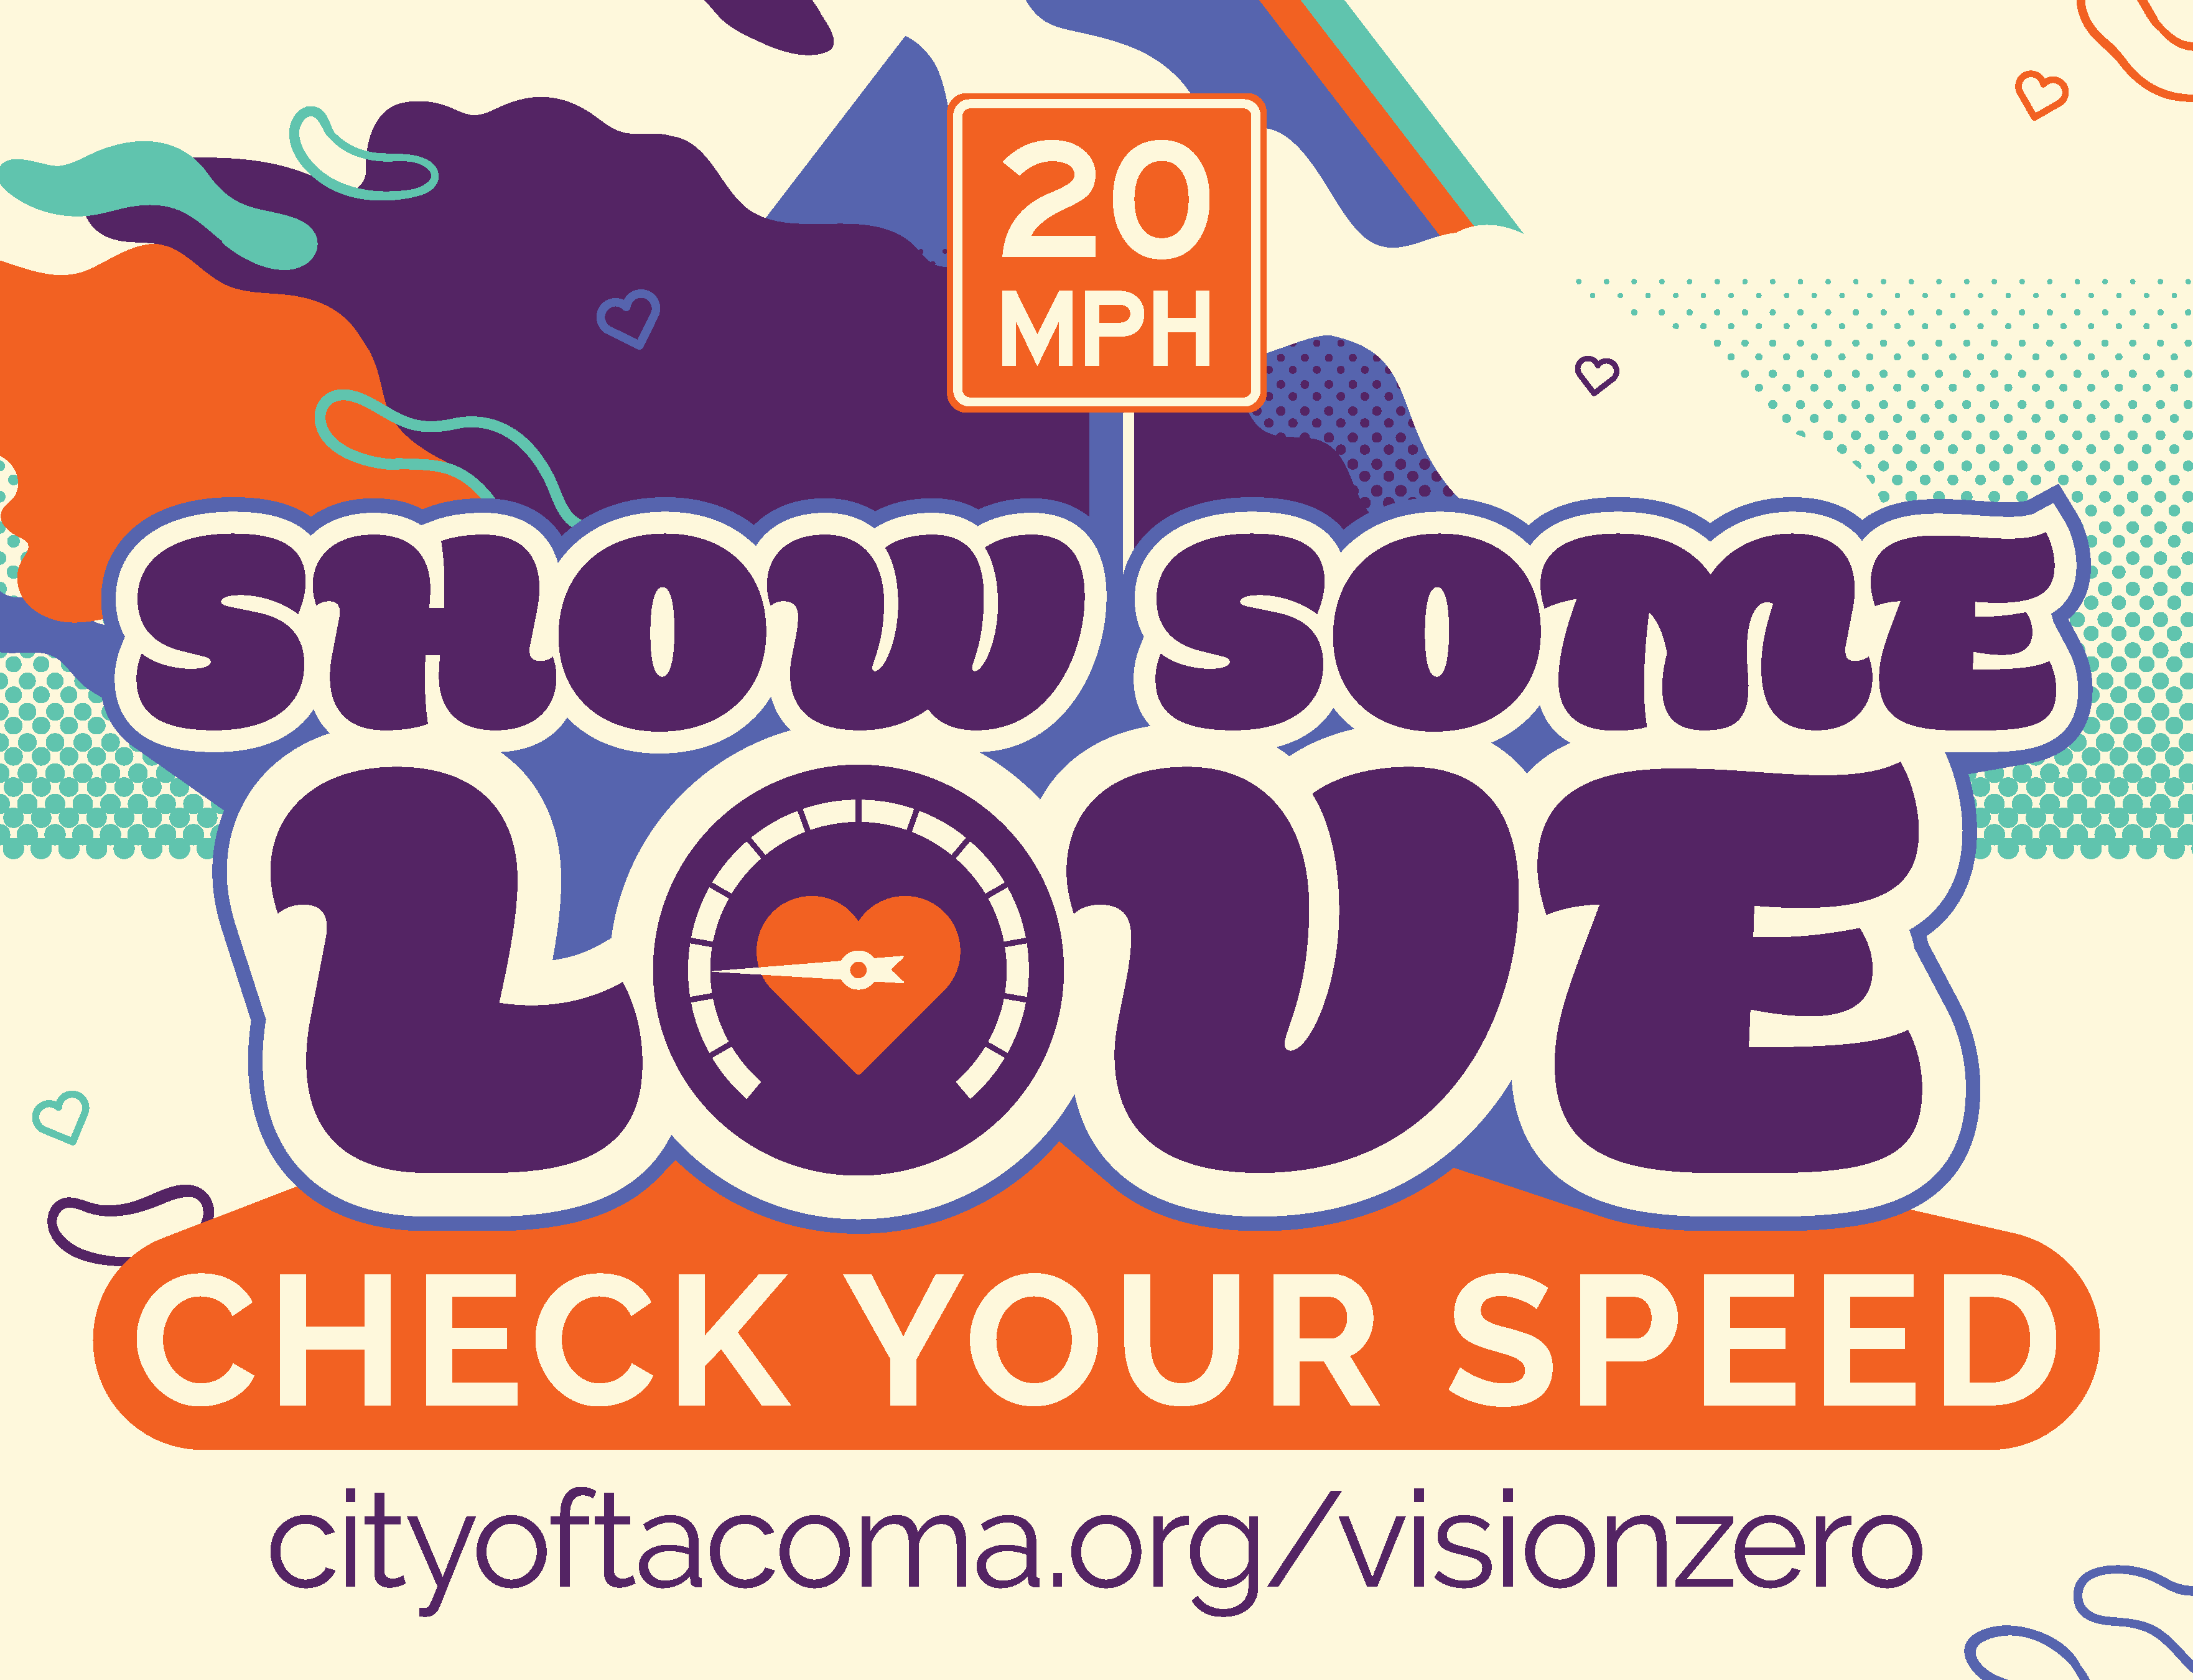 colorful image with campaign slogan "show some love, check your speed" 